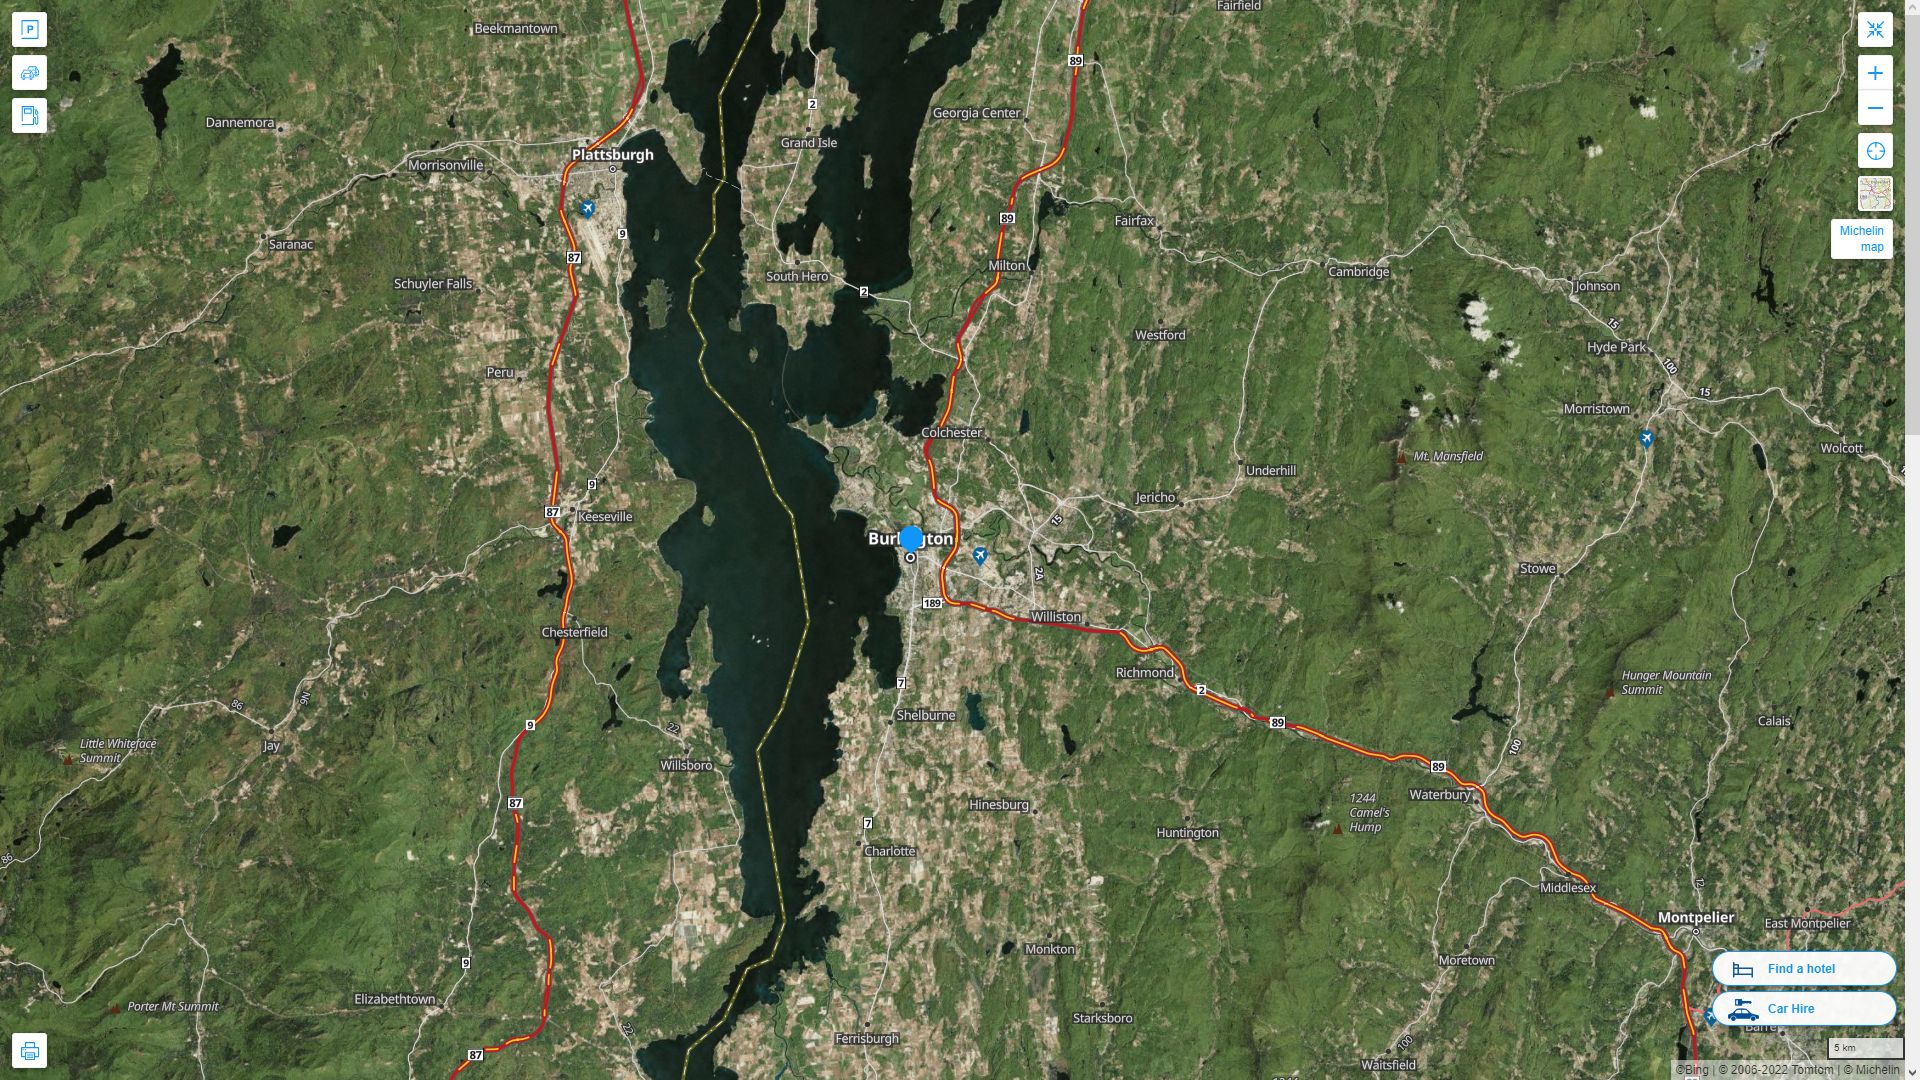 Burlington Vermont Highway and Road Map with Satellite View